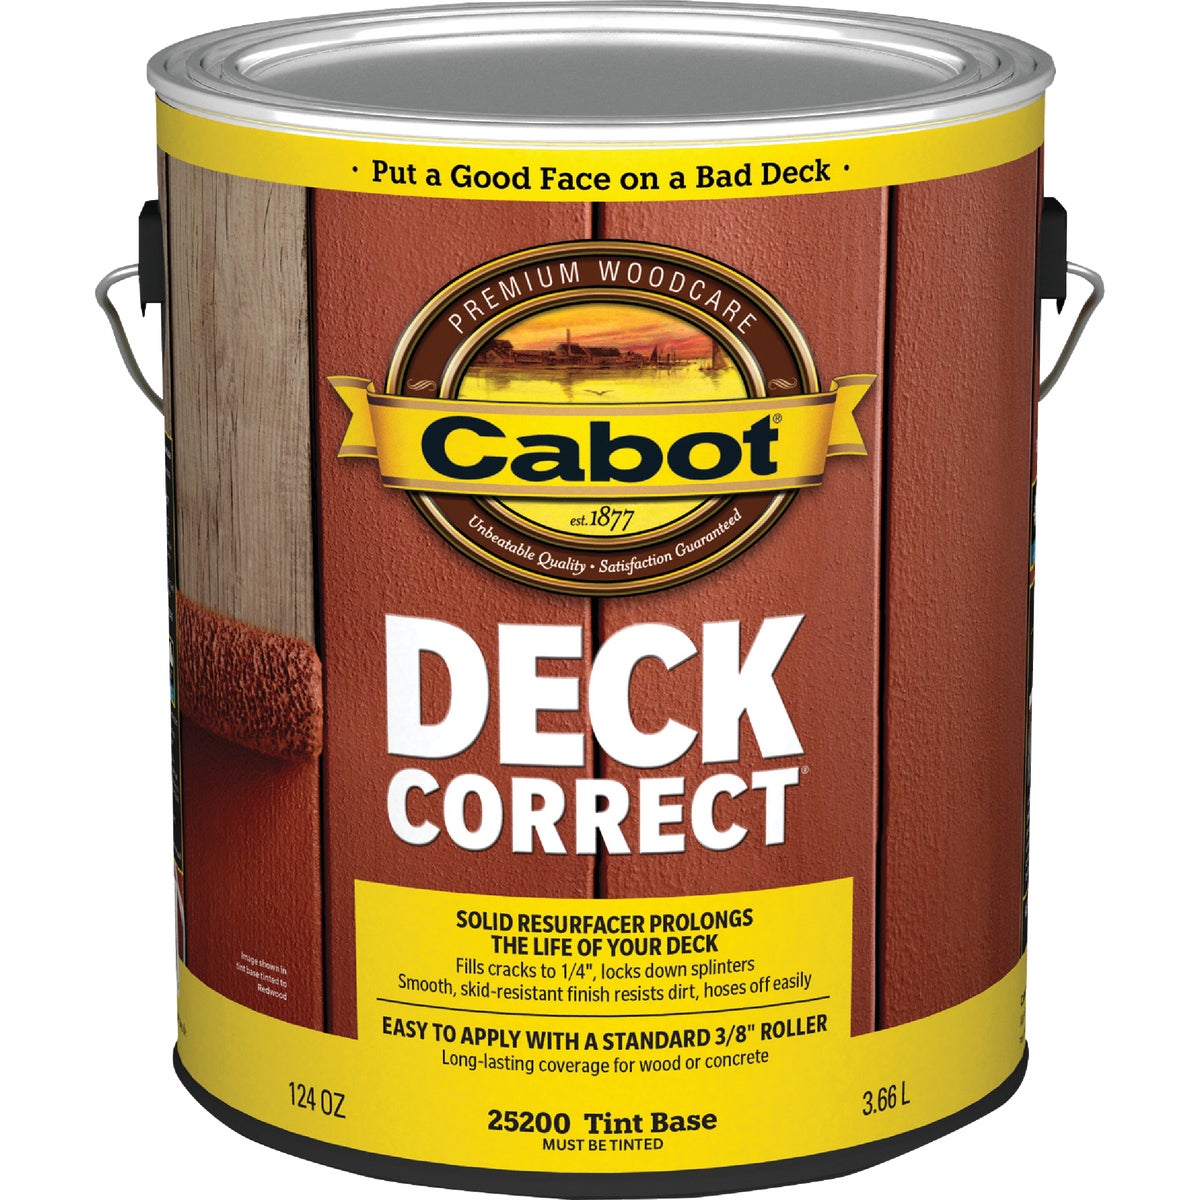 Item 770784, Solid resurfacer prolongs the life of your deck.